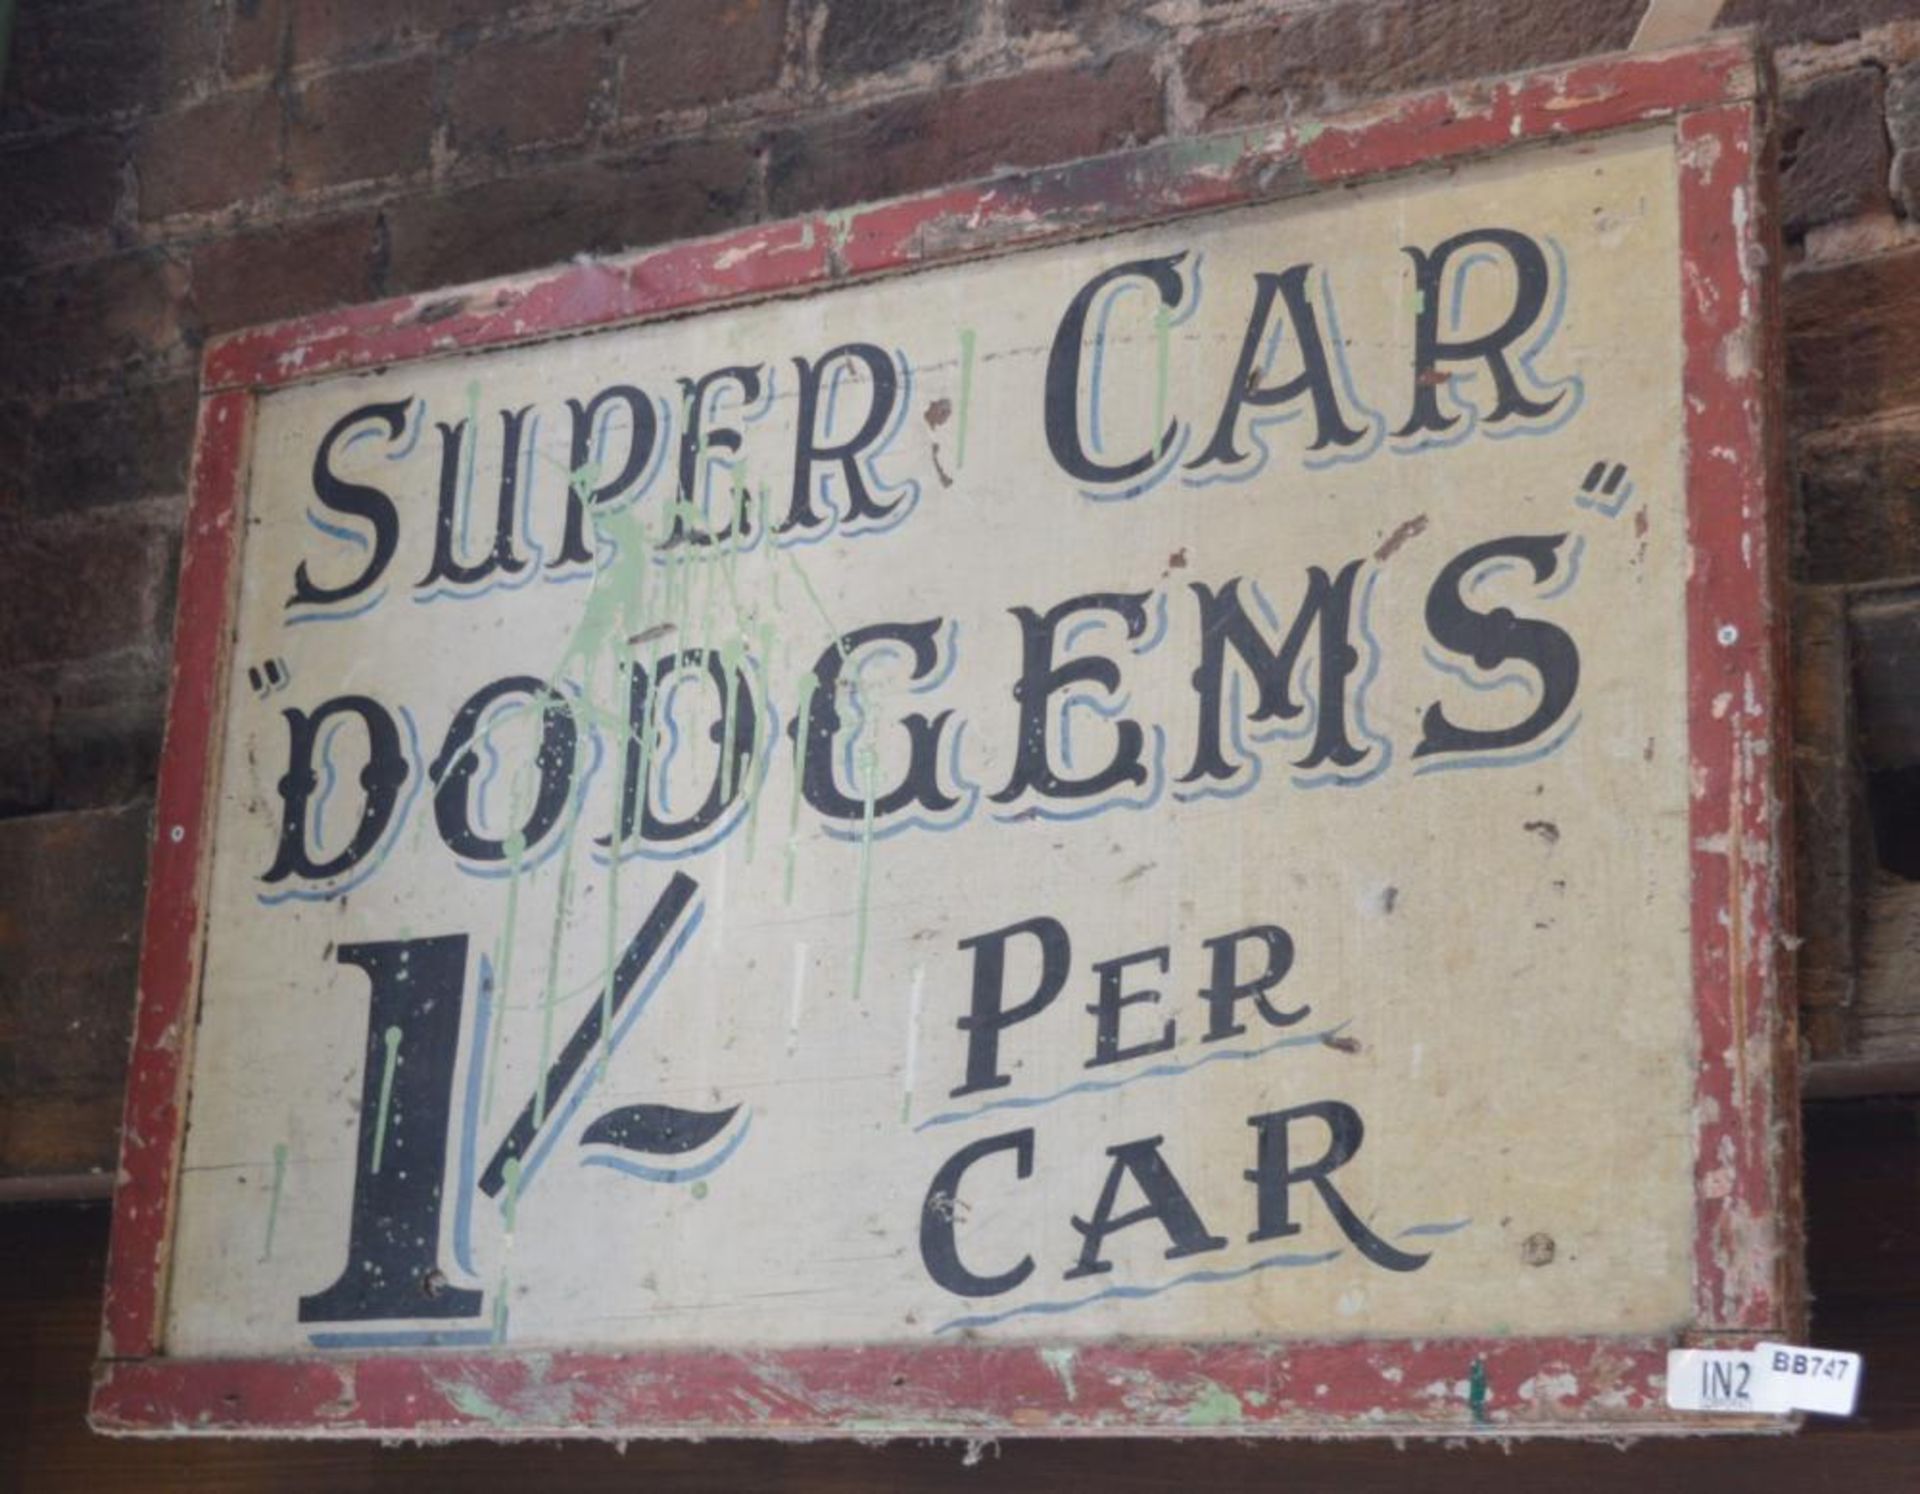 1 x Vintage Hand Painted "Super Car Dodgems 1 Shilling Per Car" Sign - 34 x 23 Inches - Ref BB747 -